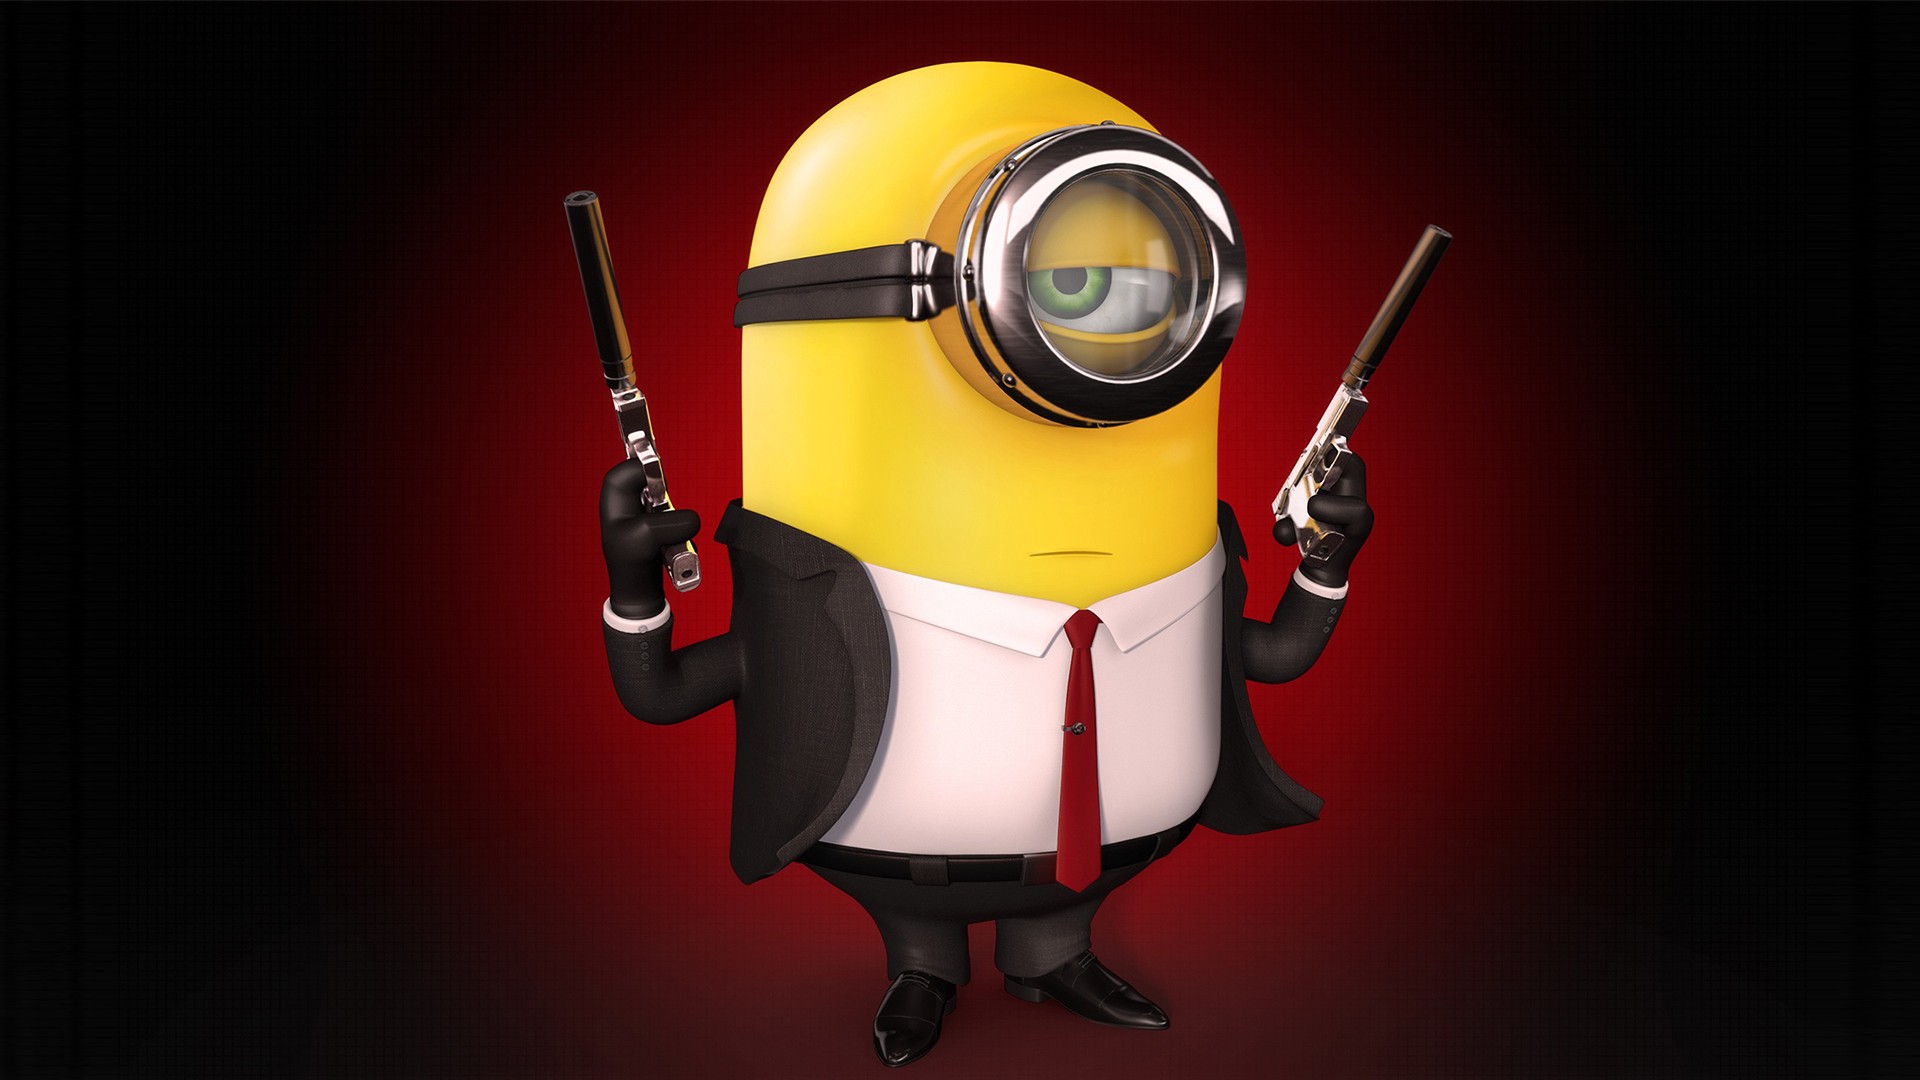 General 1920x1080 Hitman Despicable Me minions crossover red background gun weapon tie video games movies dual wield Universal Pictures movie characters video game characters